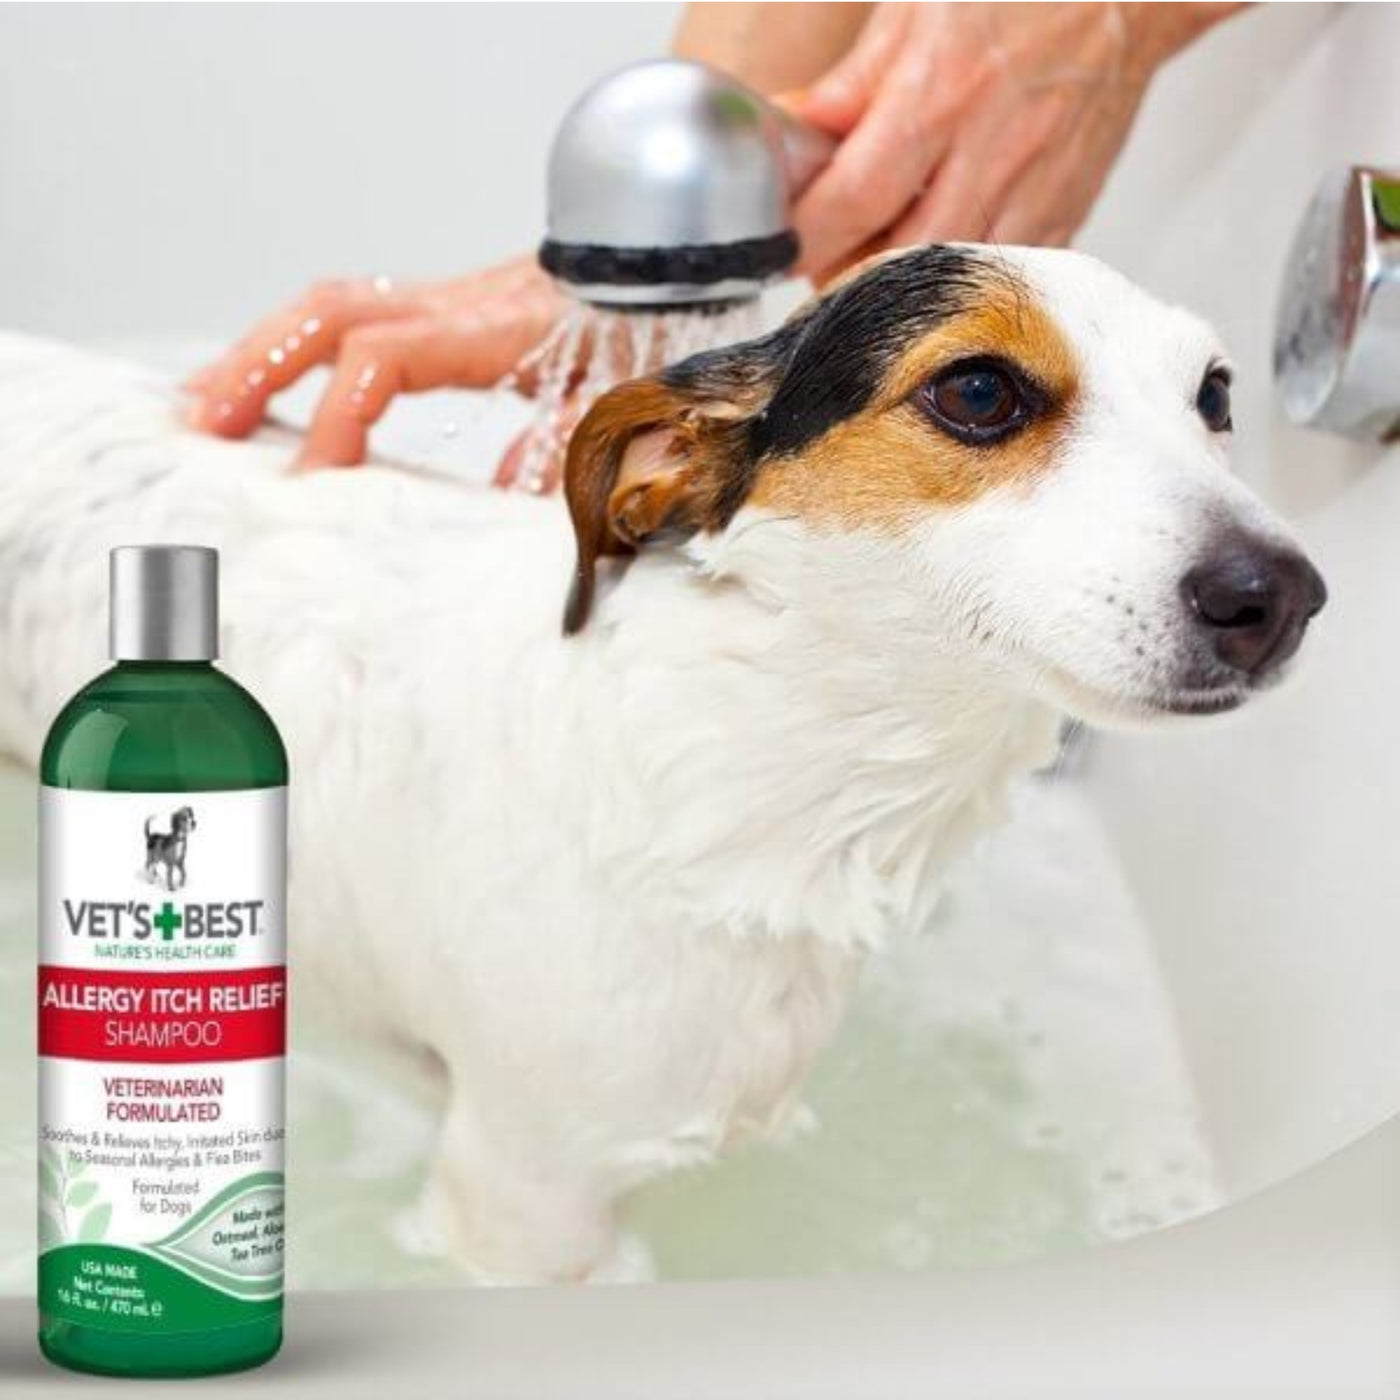 vet's best itch relief shampoo